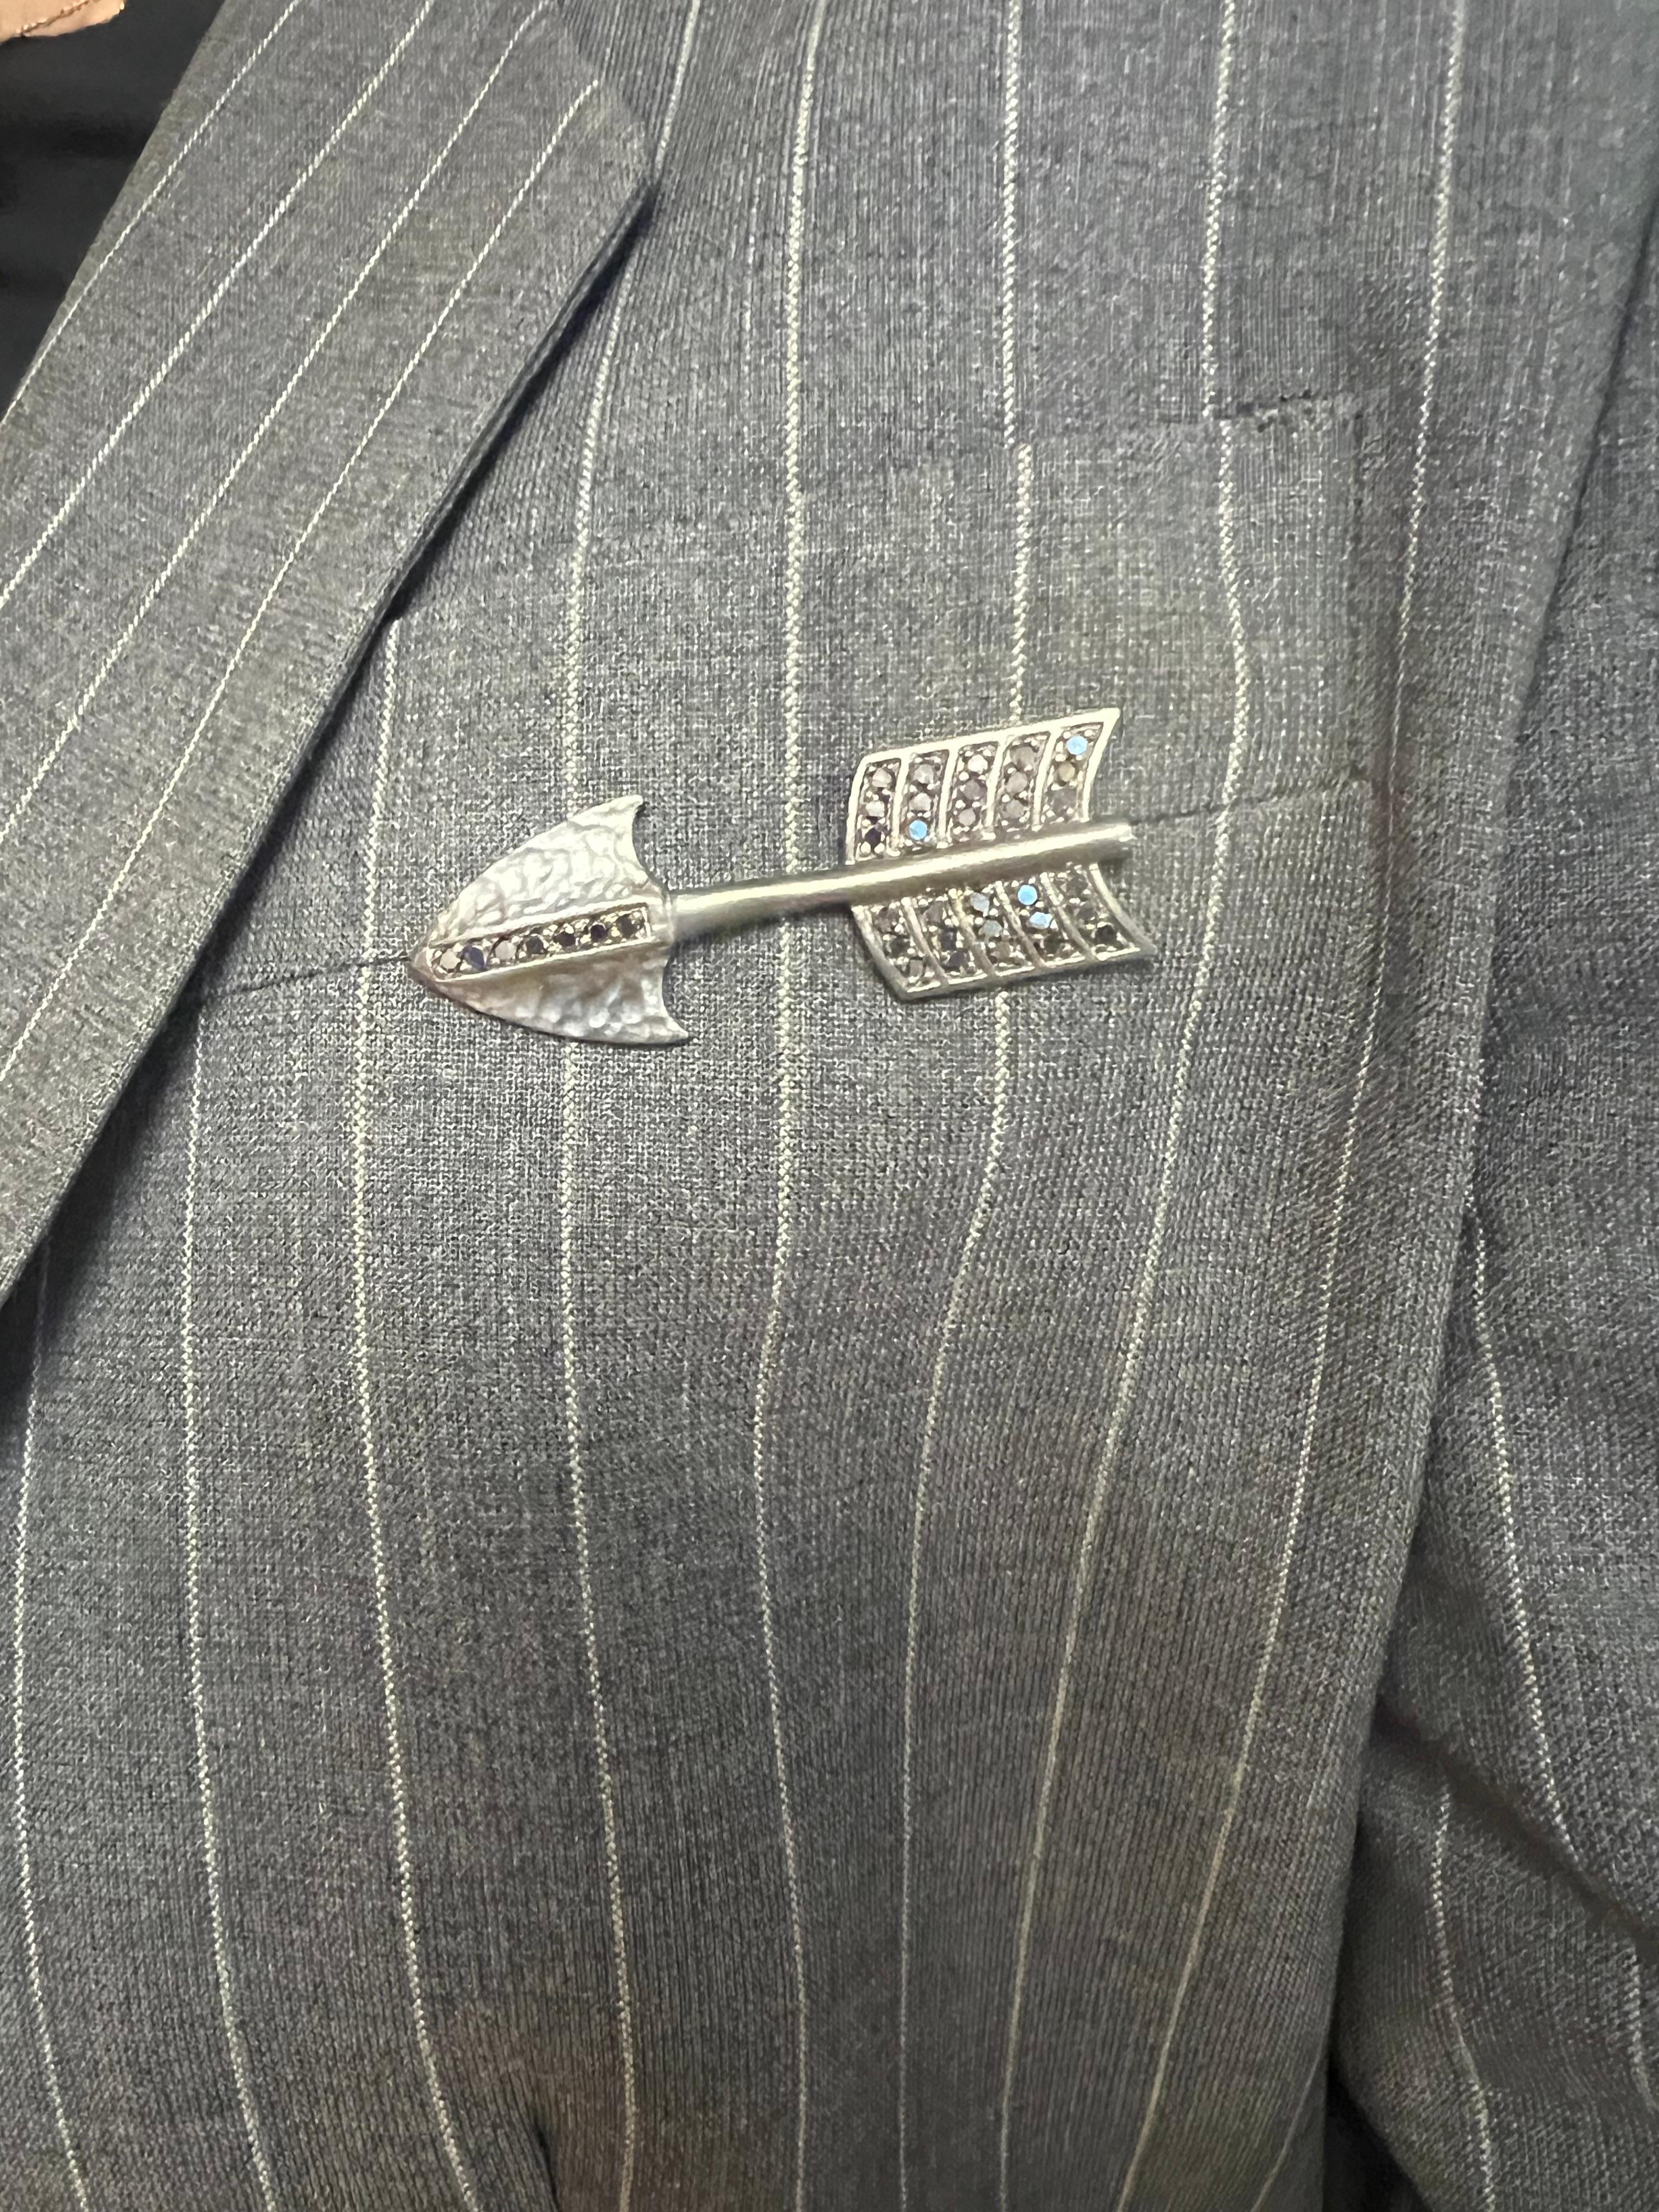 Introducing the epitome of sophistication and bold elegance: the Black Rhodium Sterling Silver Arrow Pin, a timeless accessory that merges strength with refinement. Crafted with meticulous attention to detail, this exquisite pin features a sleek